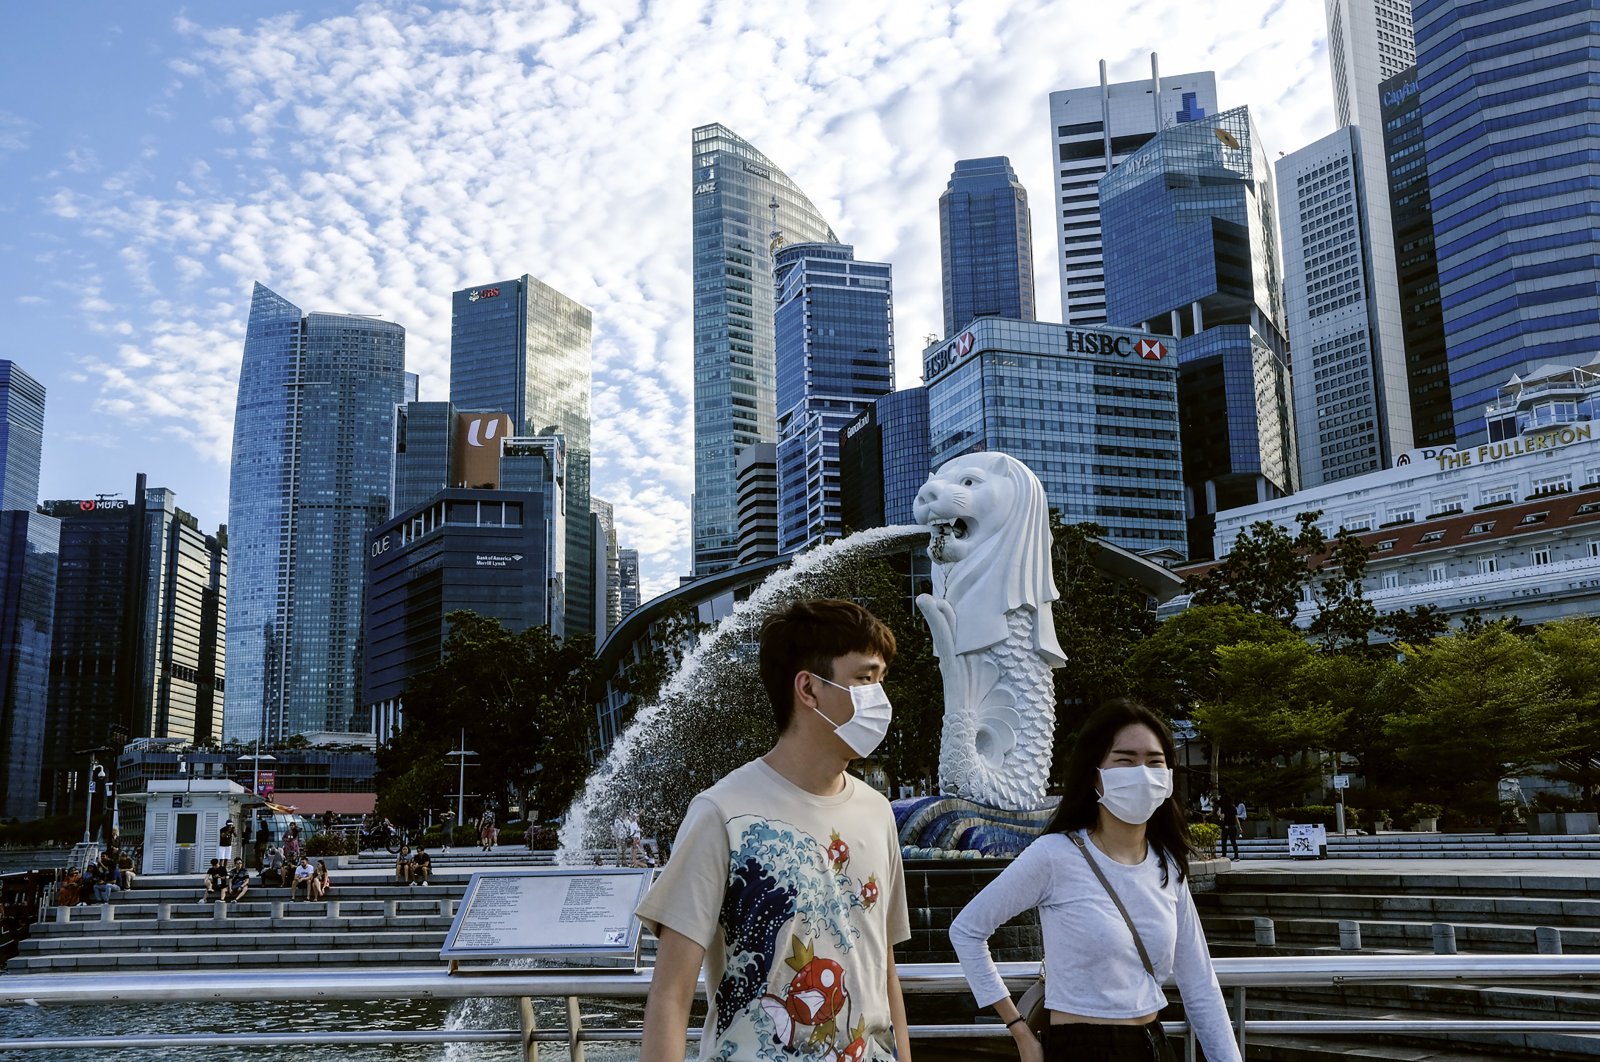 A couple wearing face masks walk past the Merlion statue in Singapore, Saturday, March 14, 2020. (AP Photo)